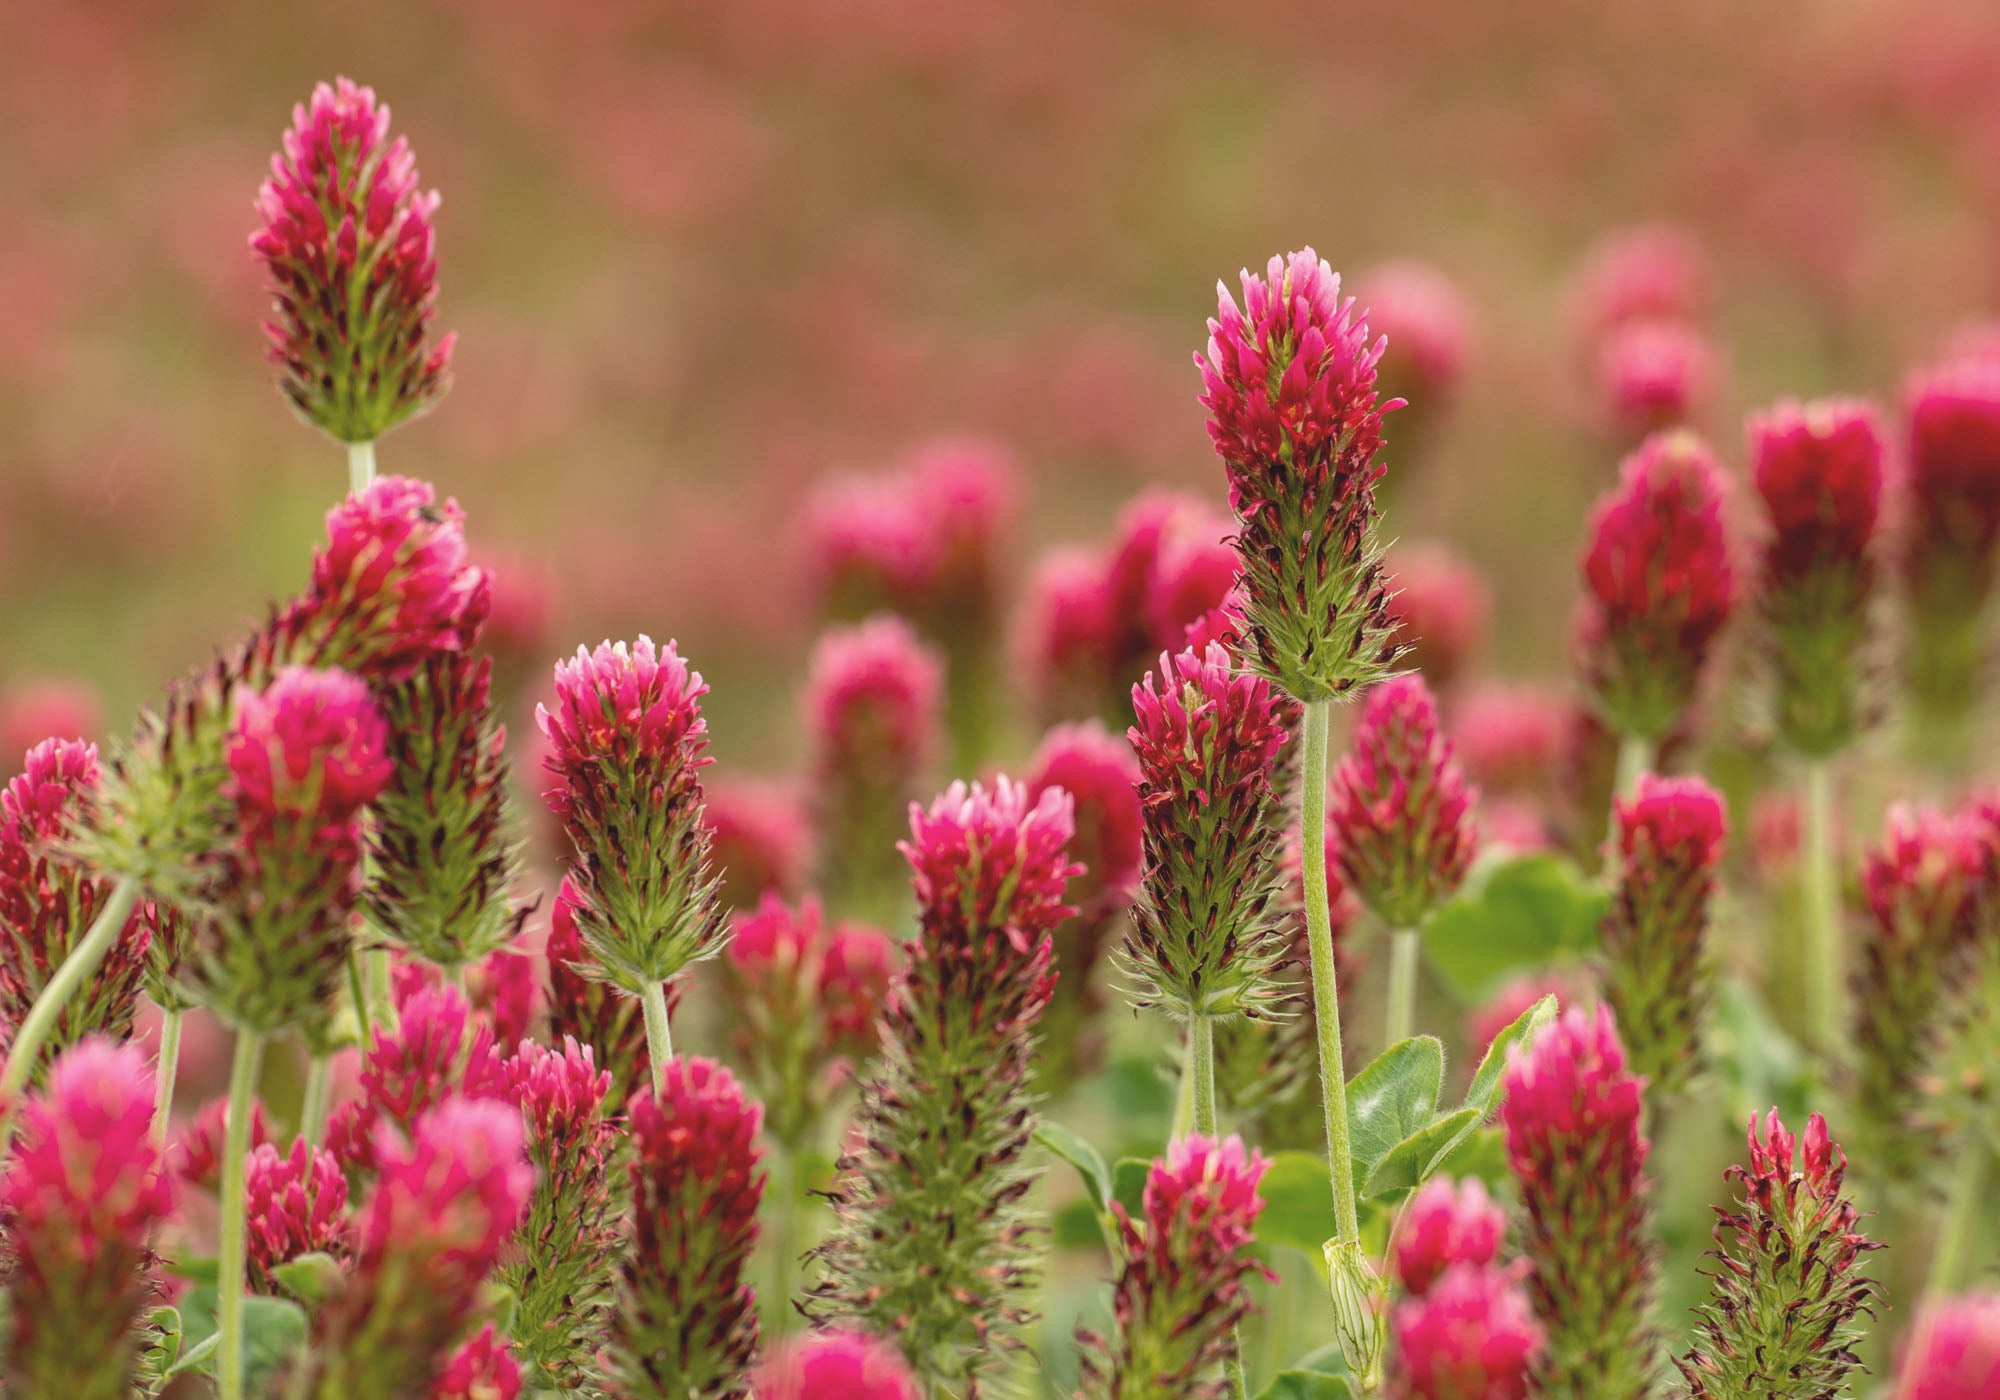 Close up of multiple red clover flowers in a field